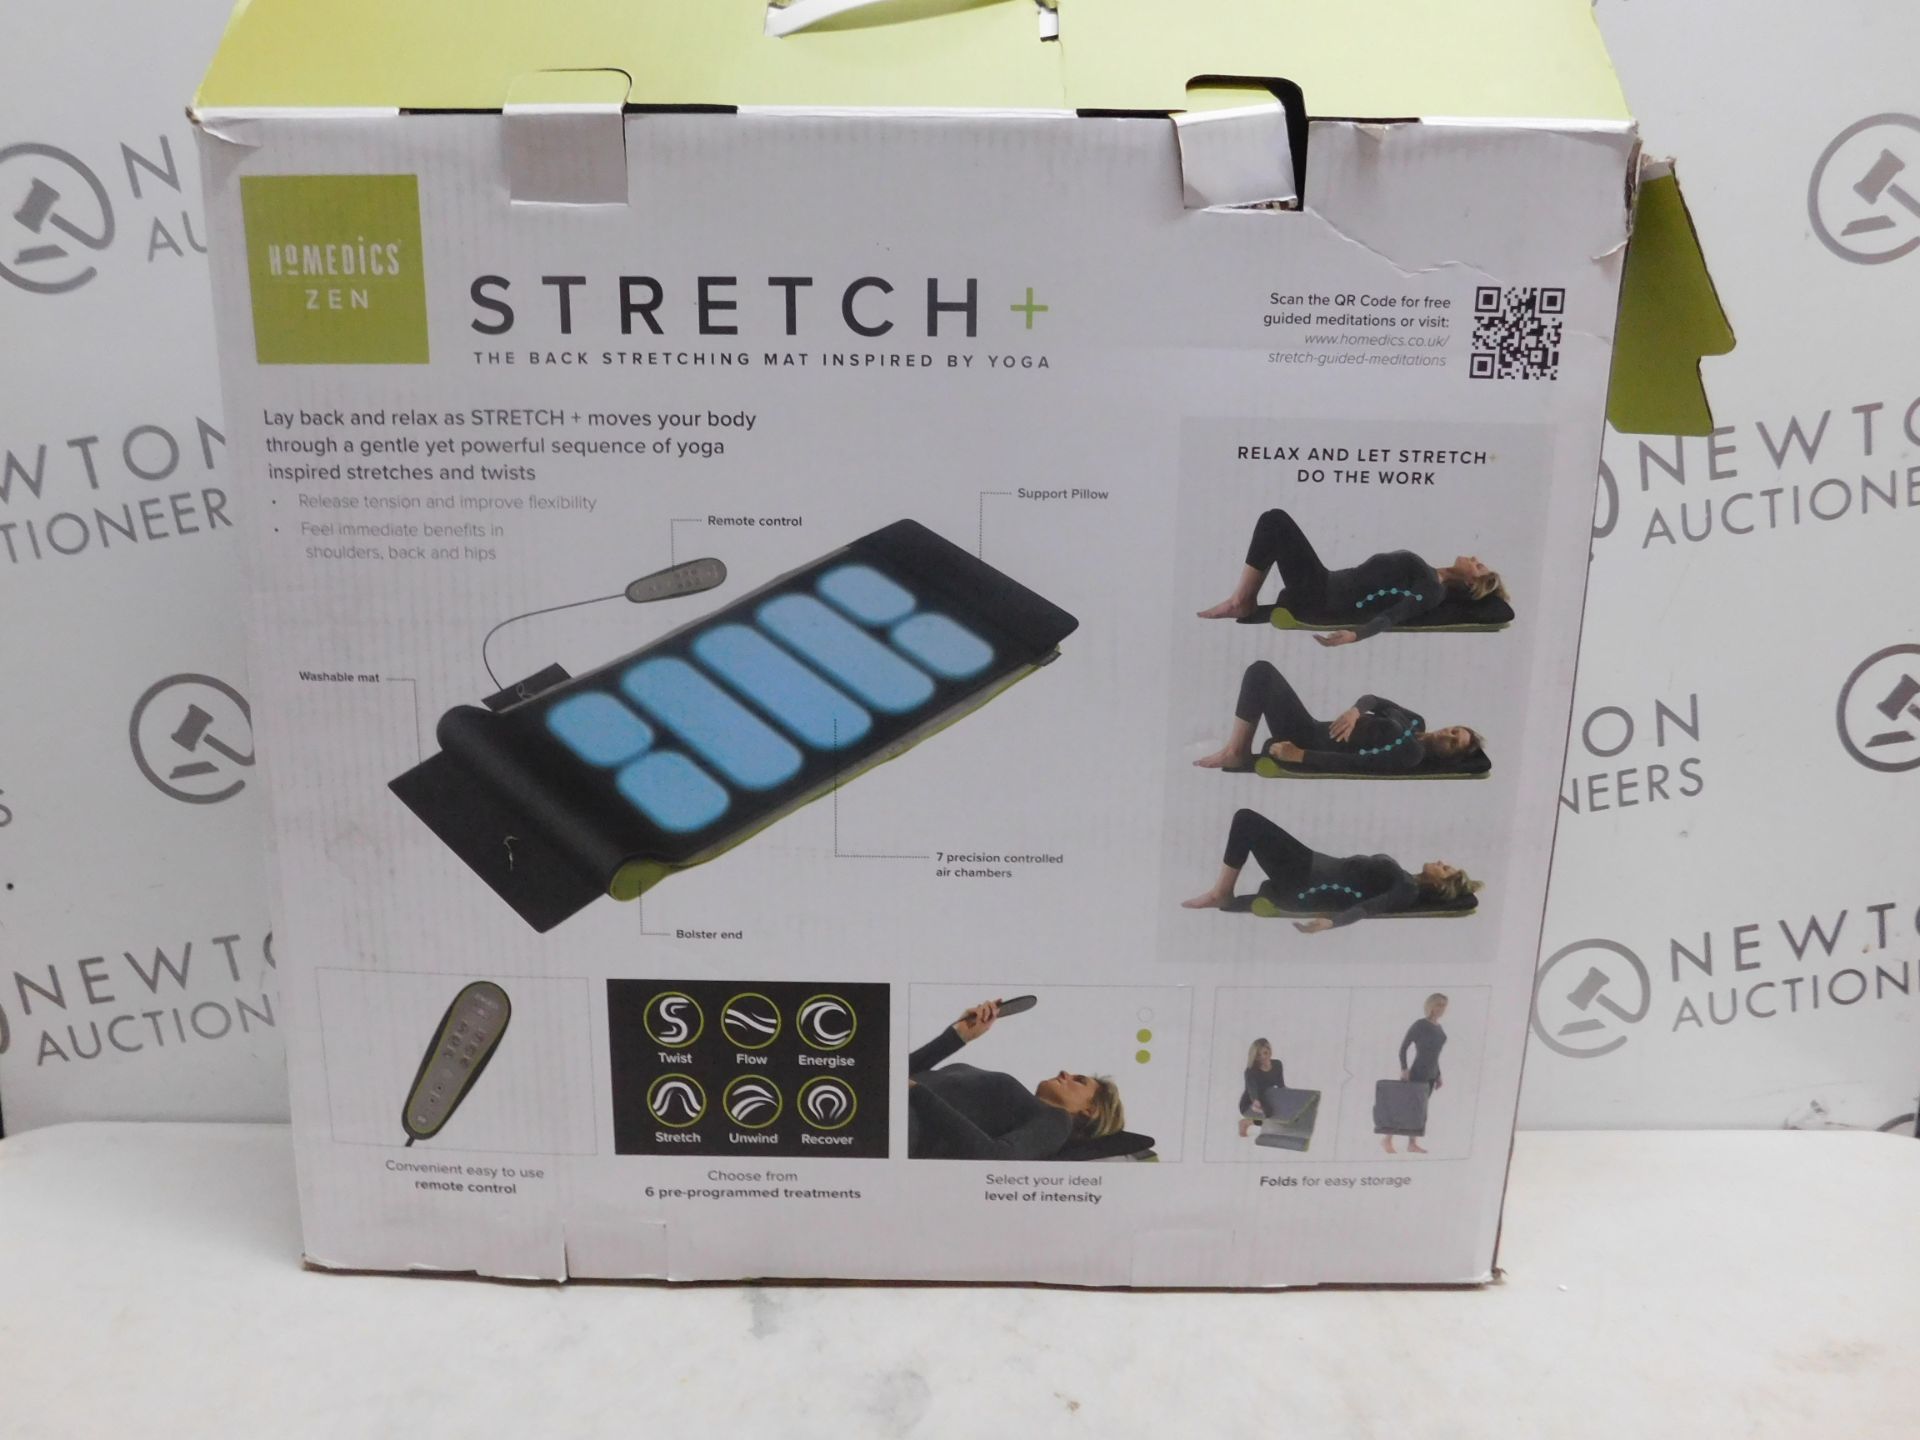 1 BOXED HOMEDICS STRETCH PLUS BACK STRETCHING MAT INSPIRED BY YOGA RRP Â£99